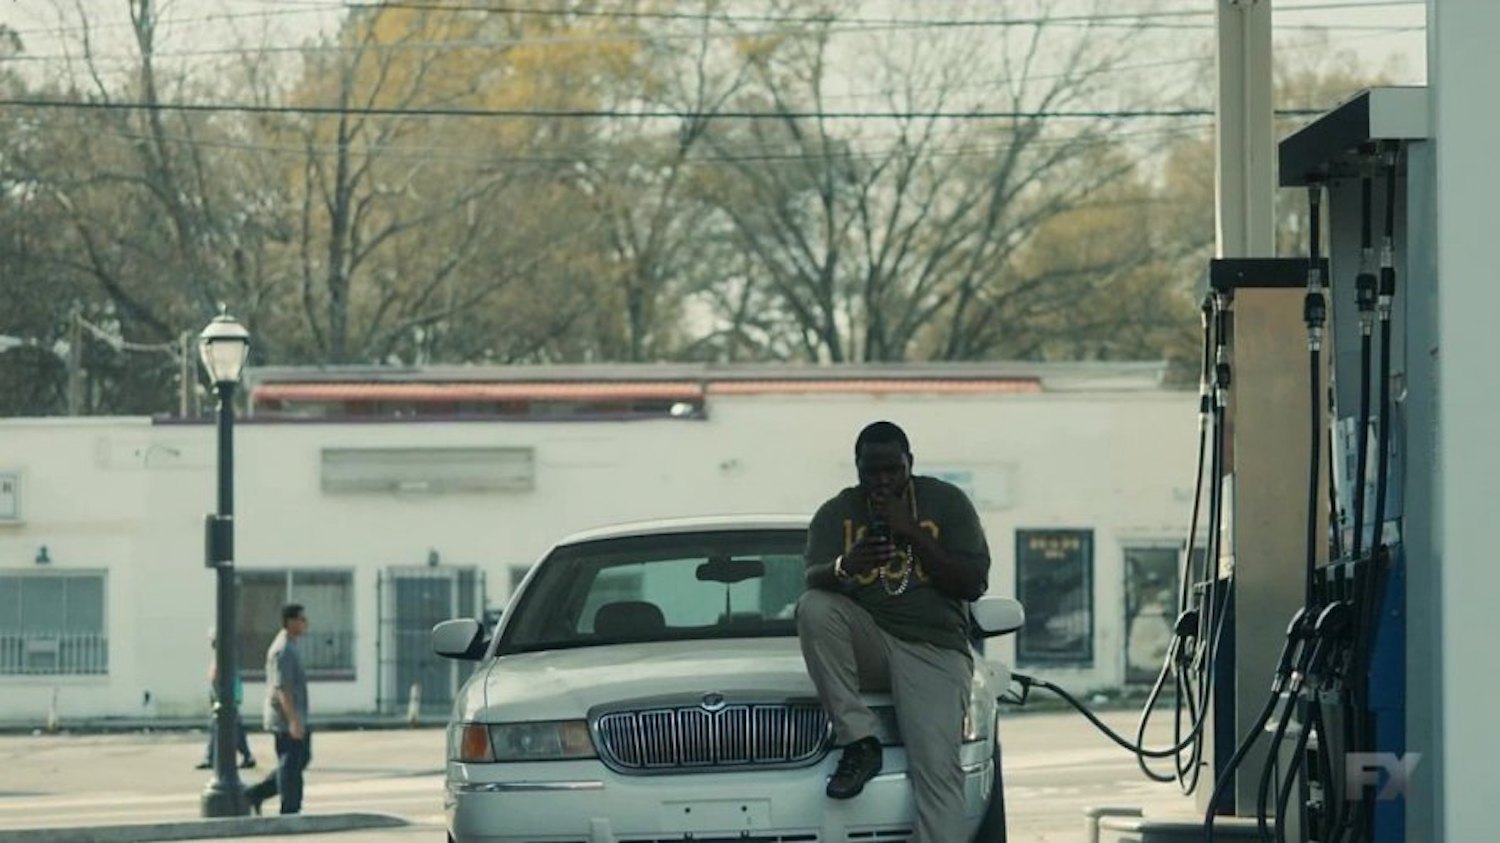 Brian Tyree Henry's Paper Boi sits on the hood of his 2000 Mercury Grand Marquis during Donal Glover's Atlanta TV show.